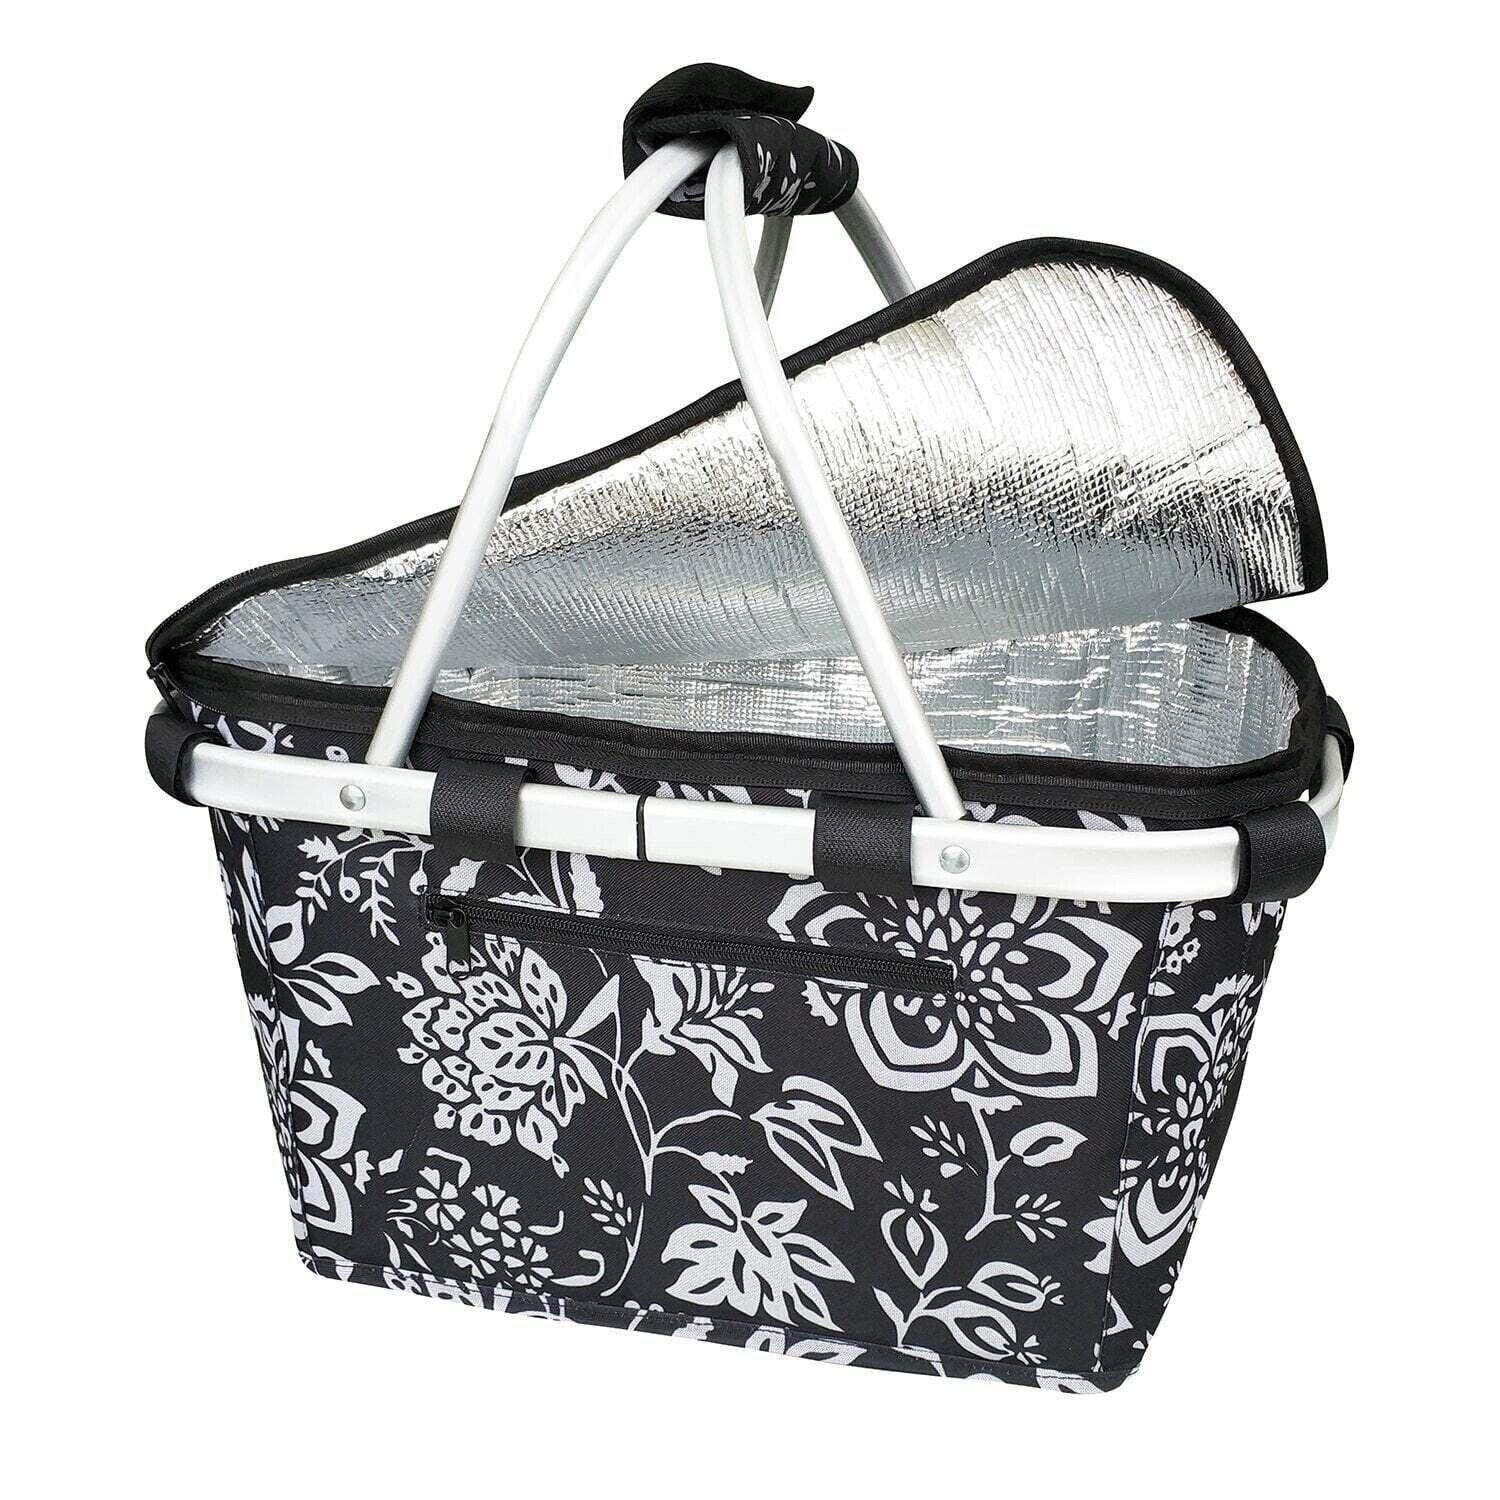 Sachi Insulated Foldable Picnic Carry Basket Bag with Lid Camellia Black